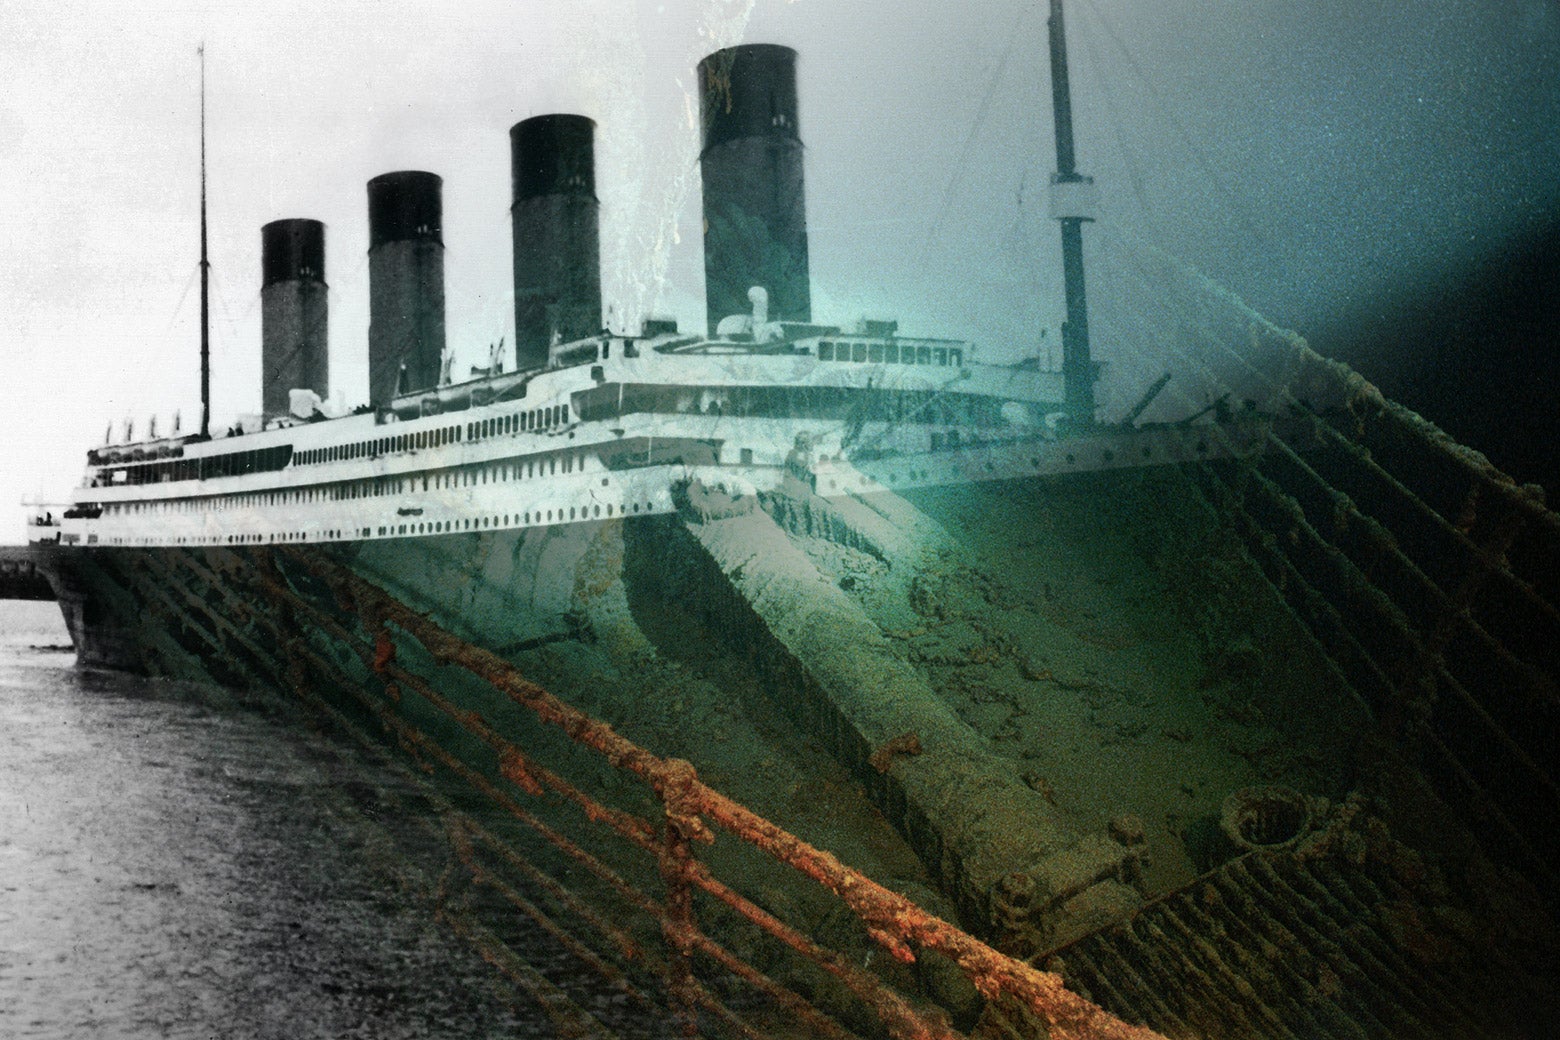 Titanic history: How the doomed ship became so famous